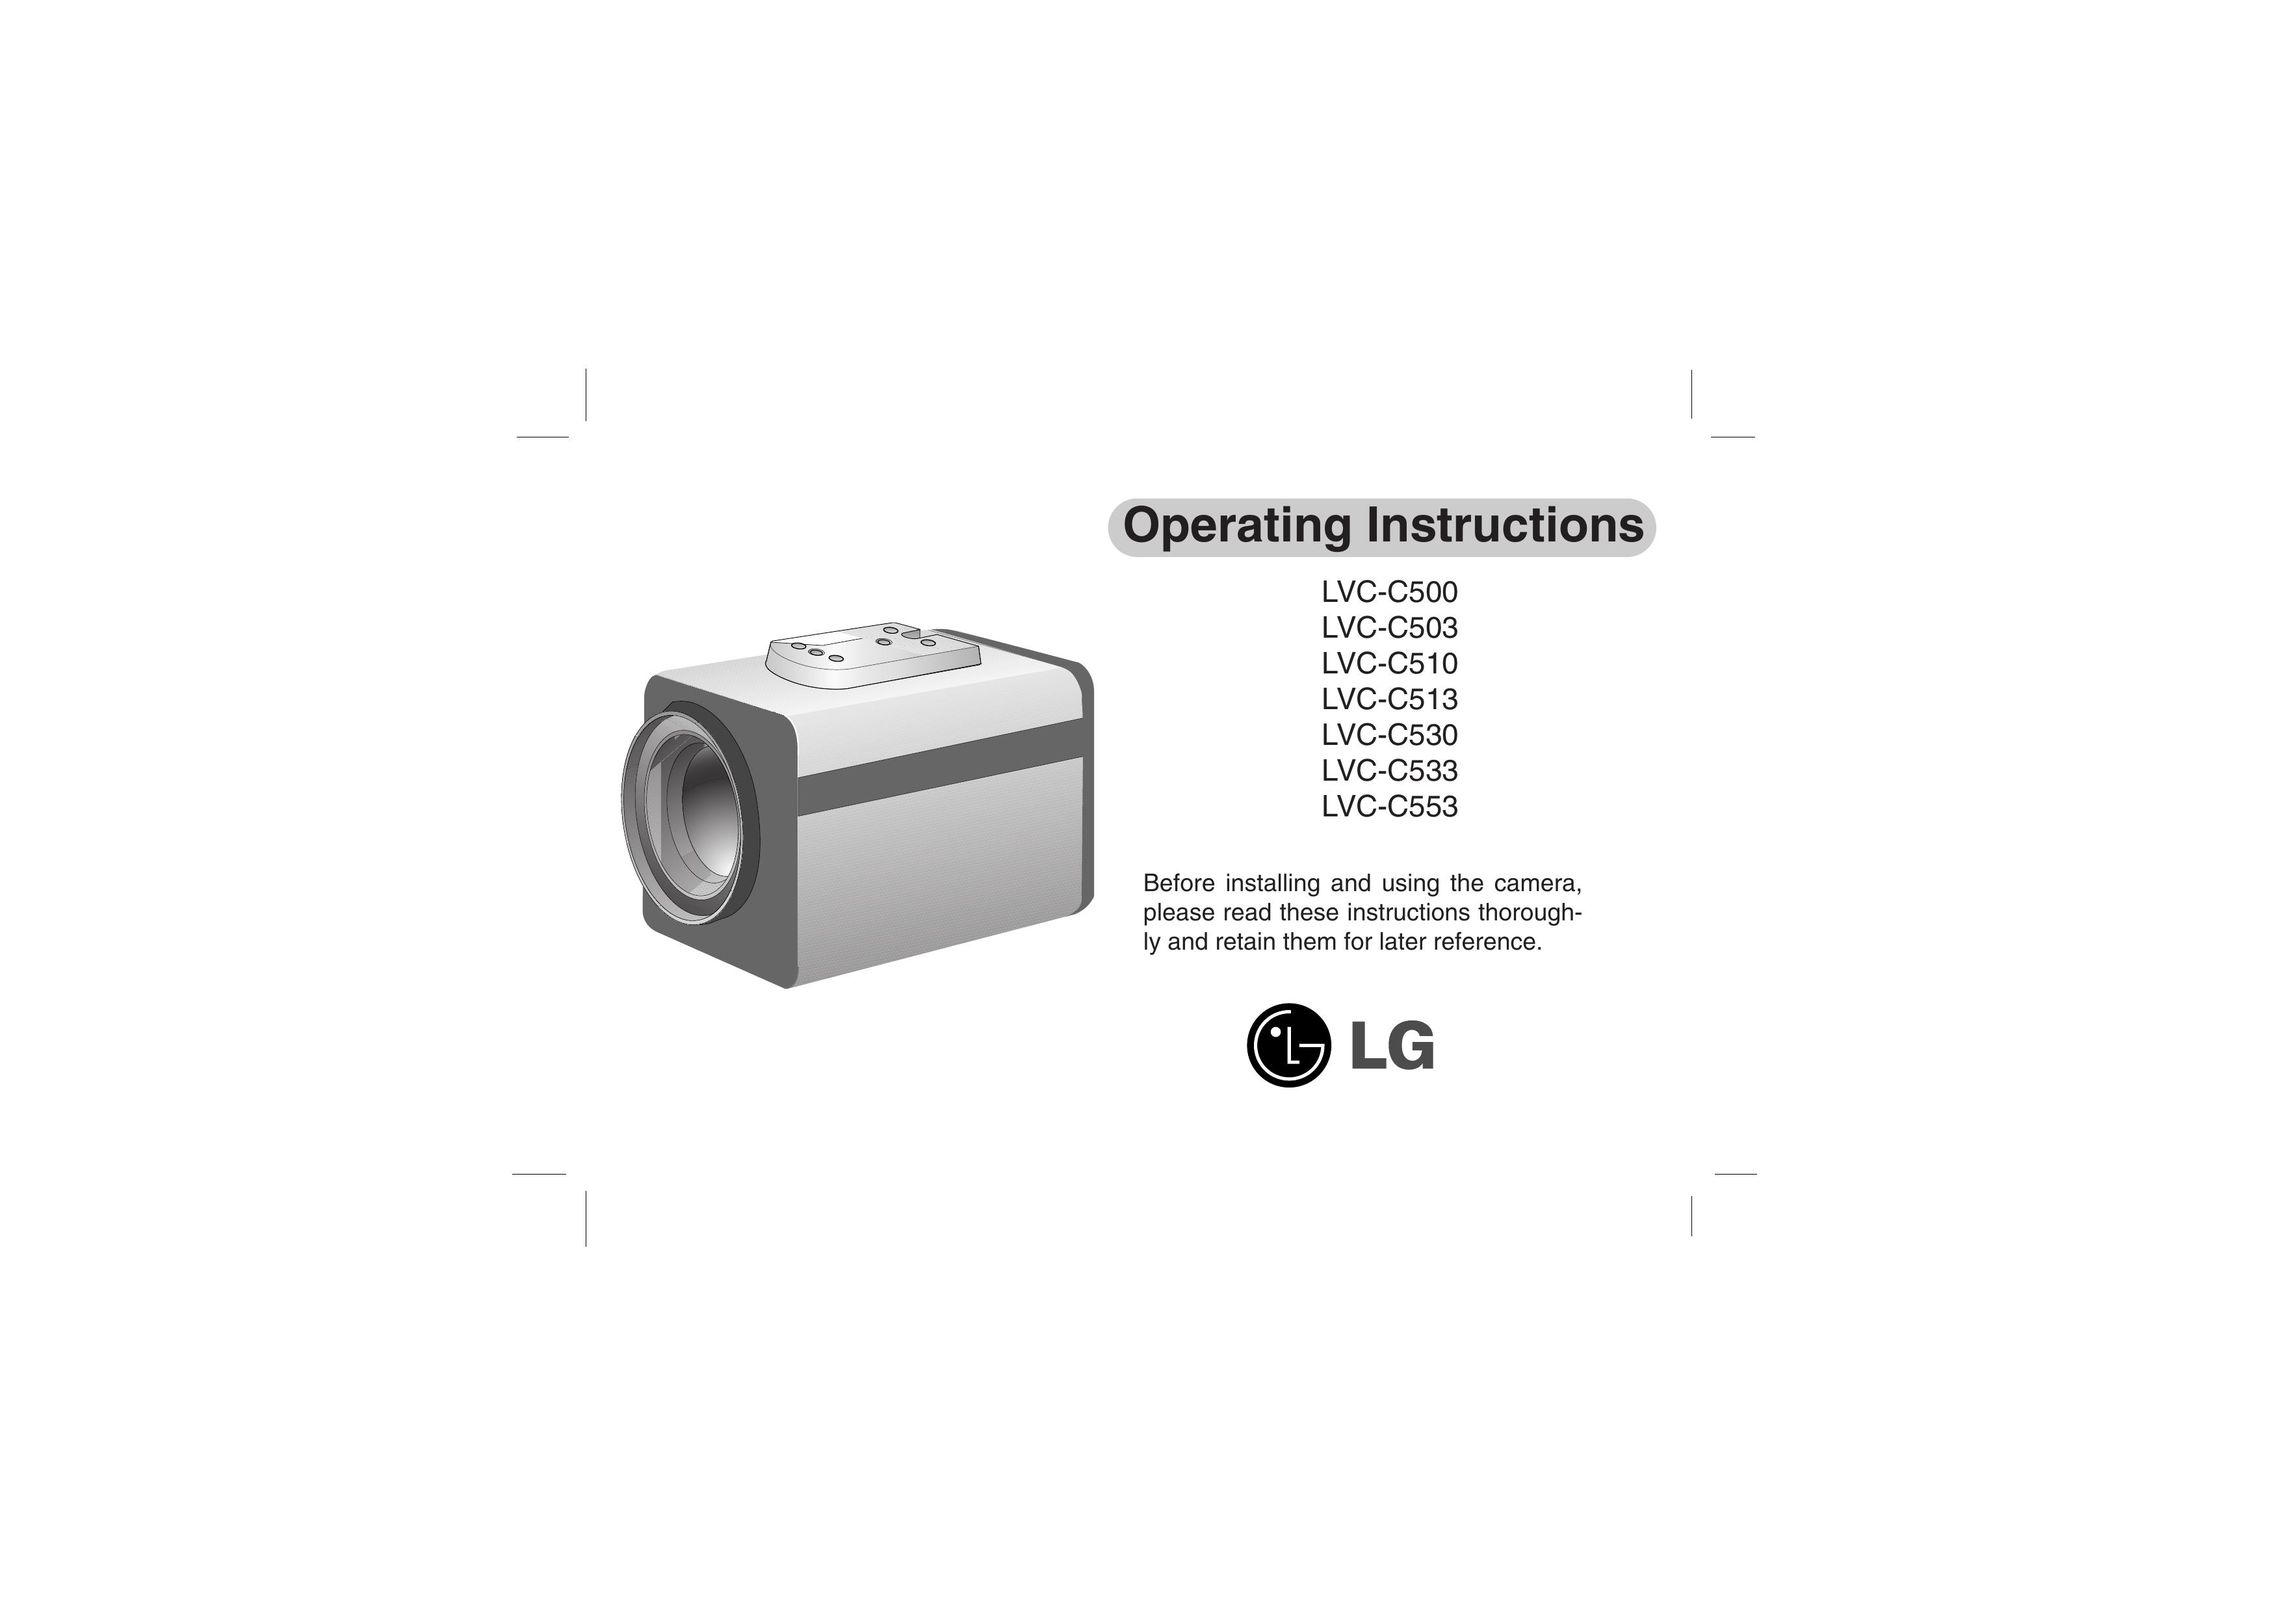 LG Electronics LVC-C510 Home Security System User Manual